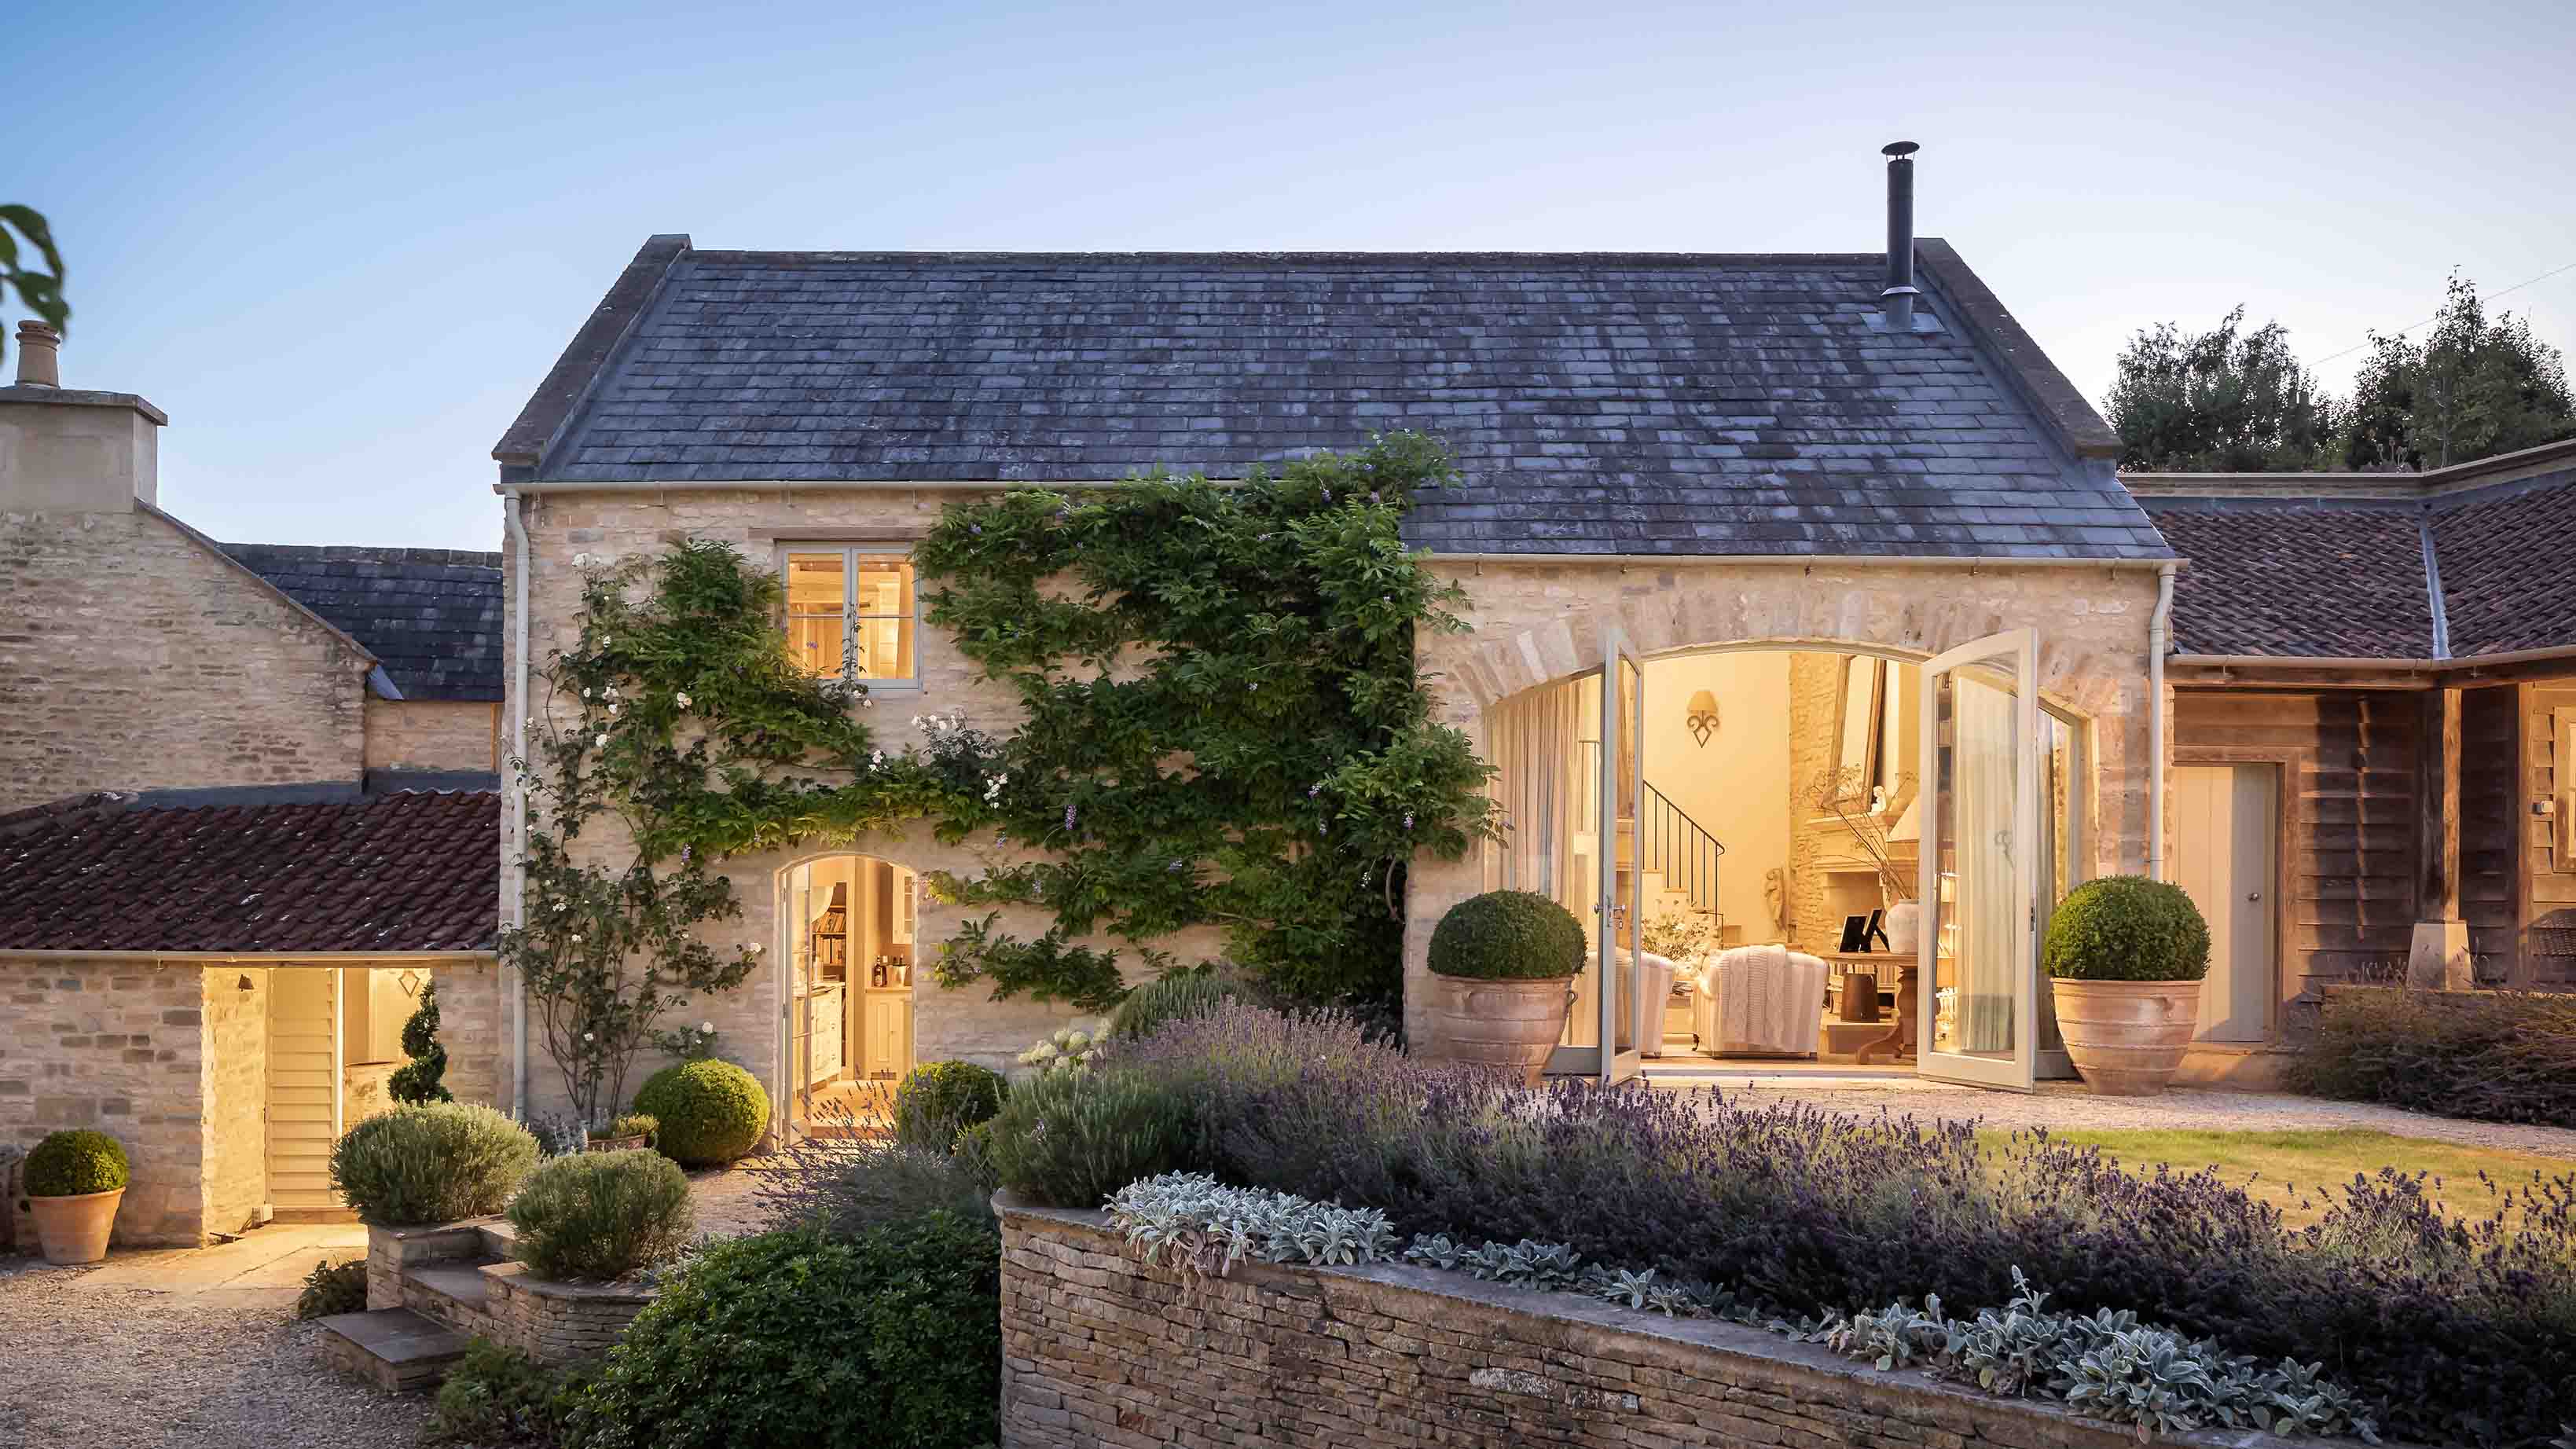 Escape to the country, where timeless charm and luxury living await at our Cotswold dream... @Lavender